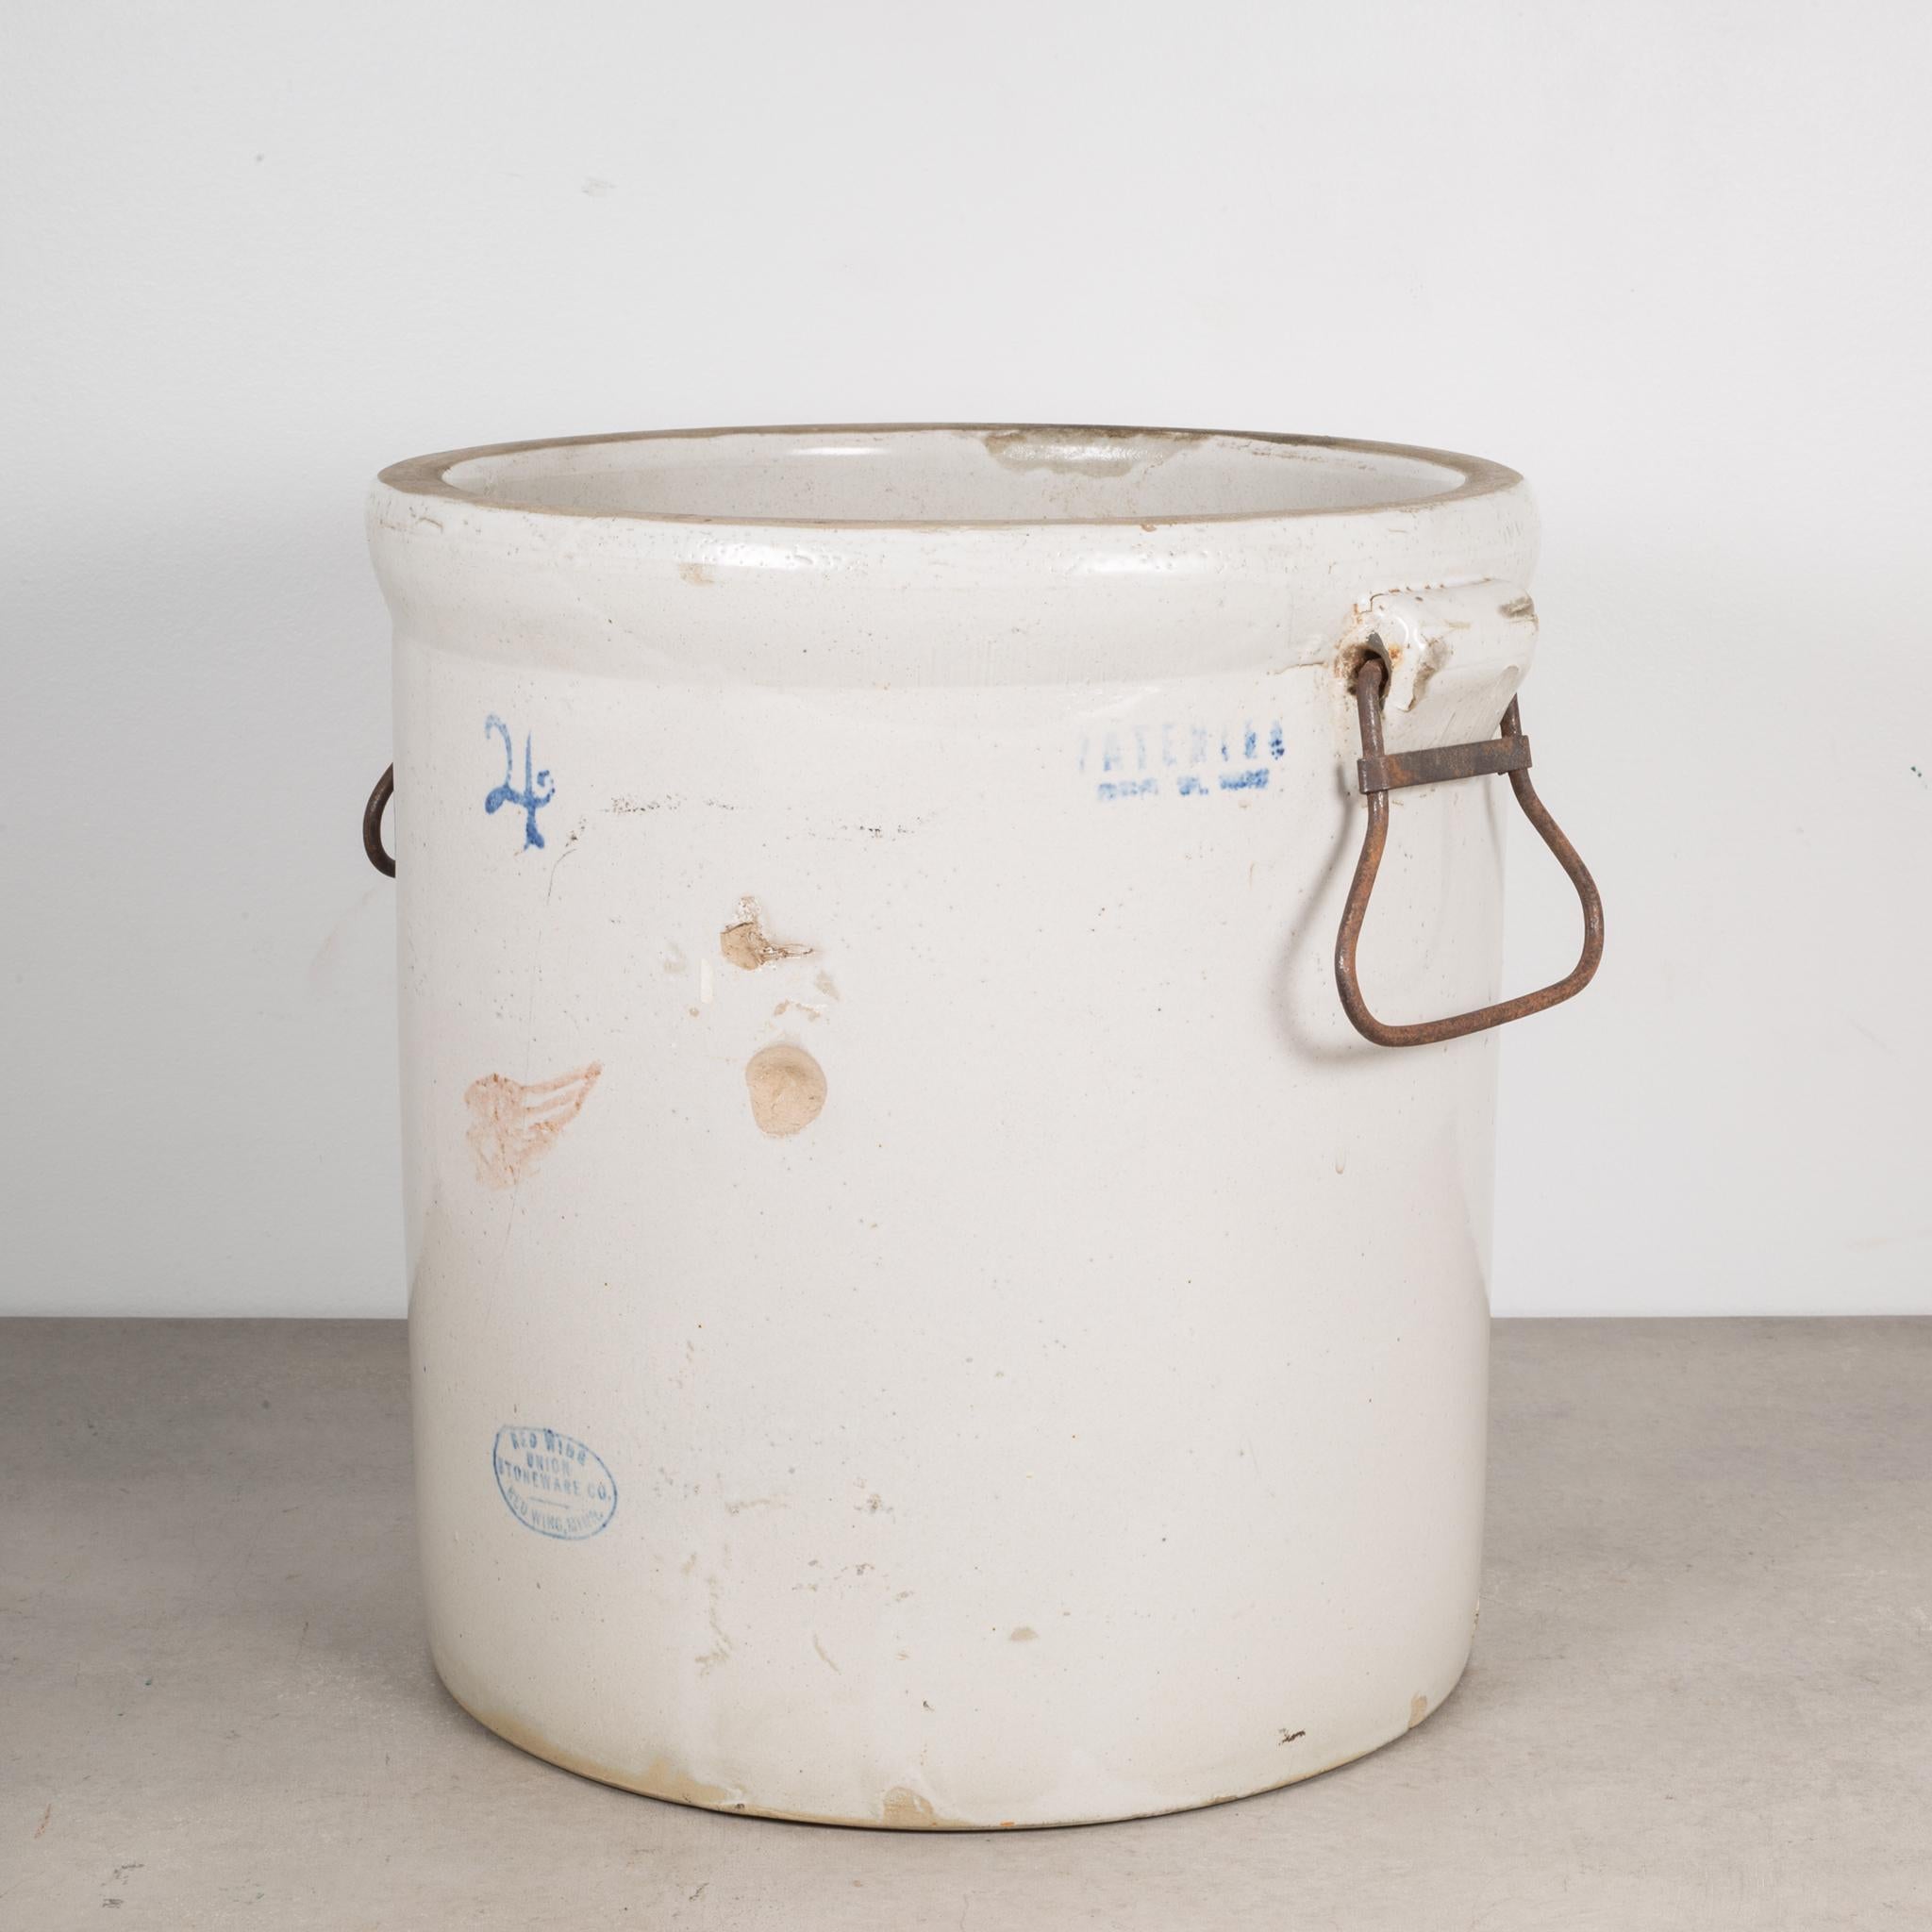 About

This is an original commercial 4 gallon crock with ceramic wrapped metal handles manufactured by the Red Wing Union Stoneware Company, Minnesota USA. The piece has retained its original finish and is in excellent condition with appropriate